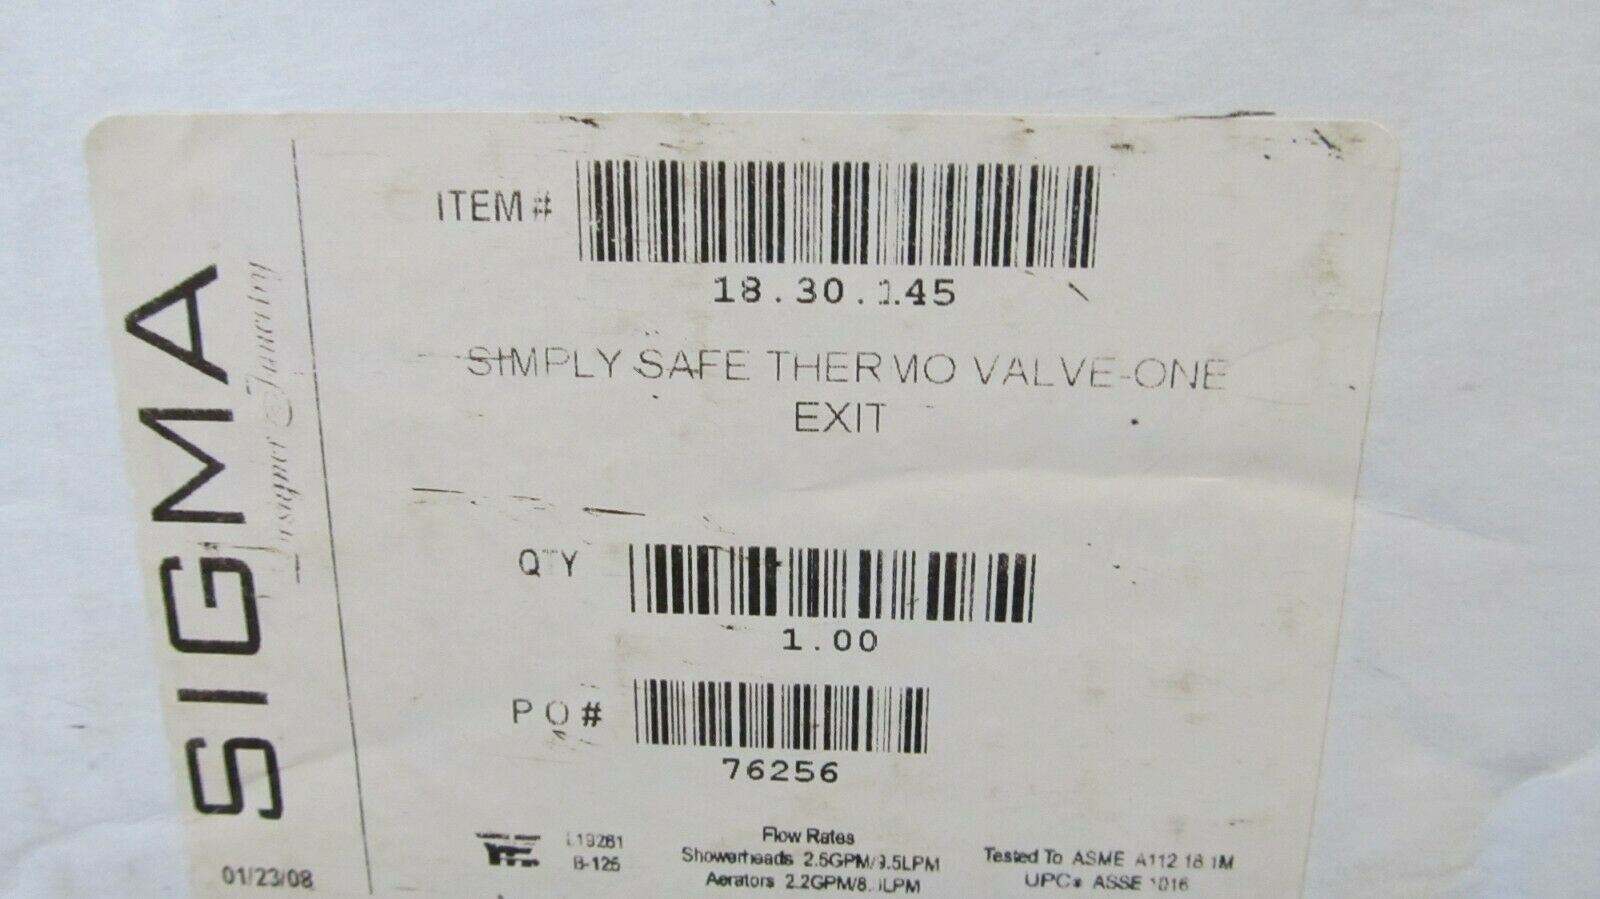 Primary image for Sigma 18.30.145 Simply Safe Thermo Valve - 1 Exit  New in Open Box